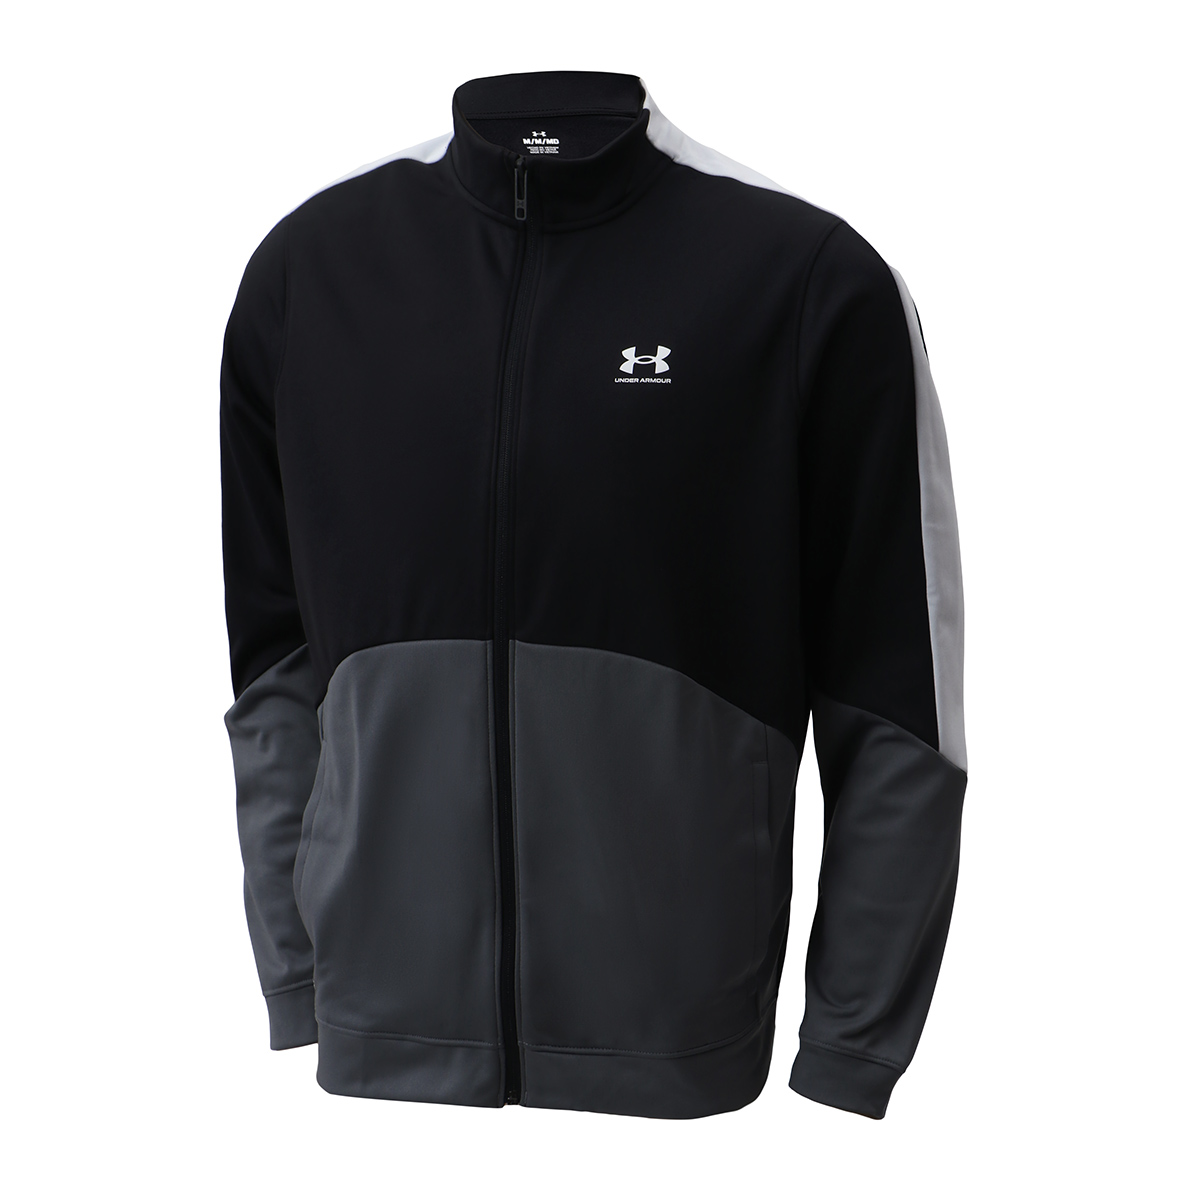 Campera Training Under Armour Tricot Fashion Hombre,  image number null